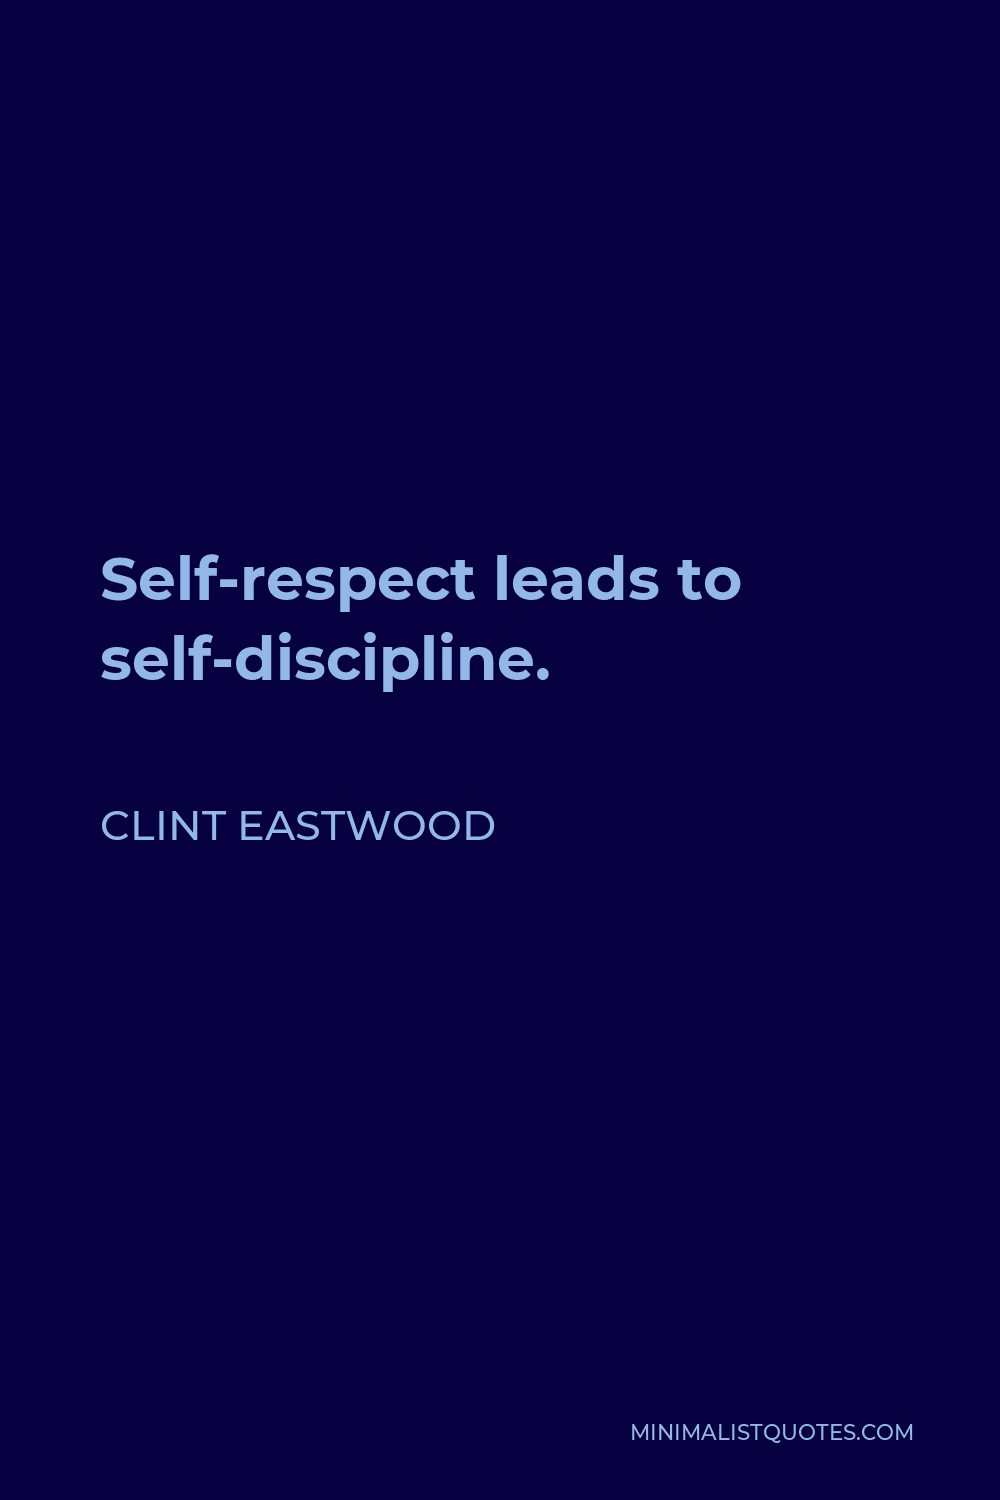 Clint Eastwood Quote - Self-respect leads to self-discipline.